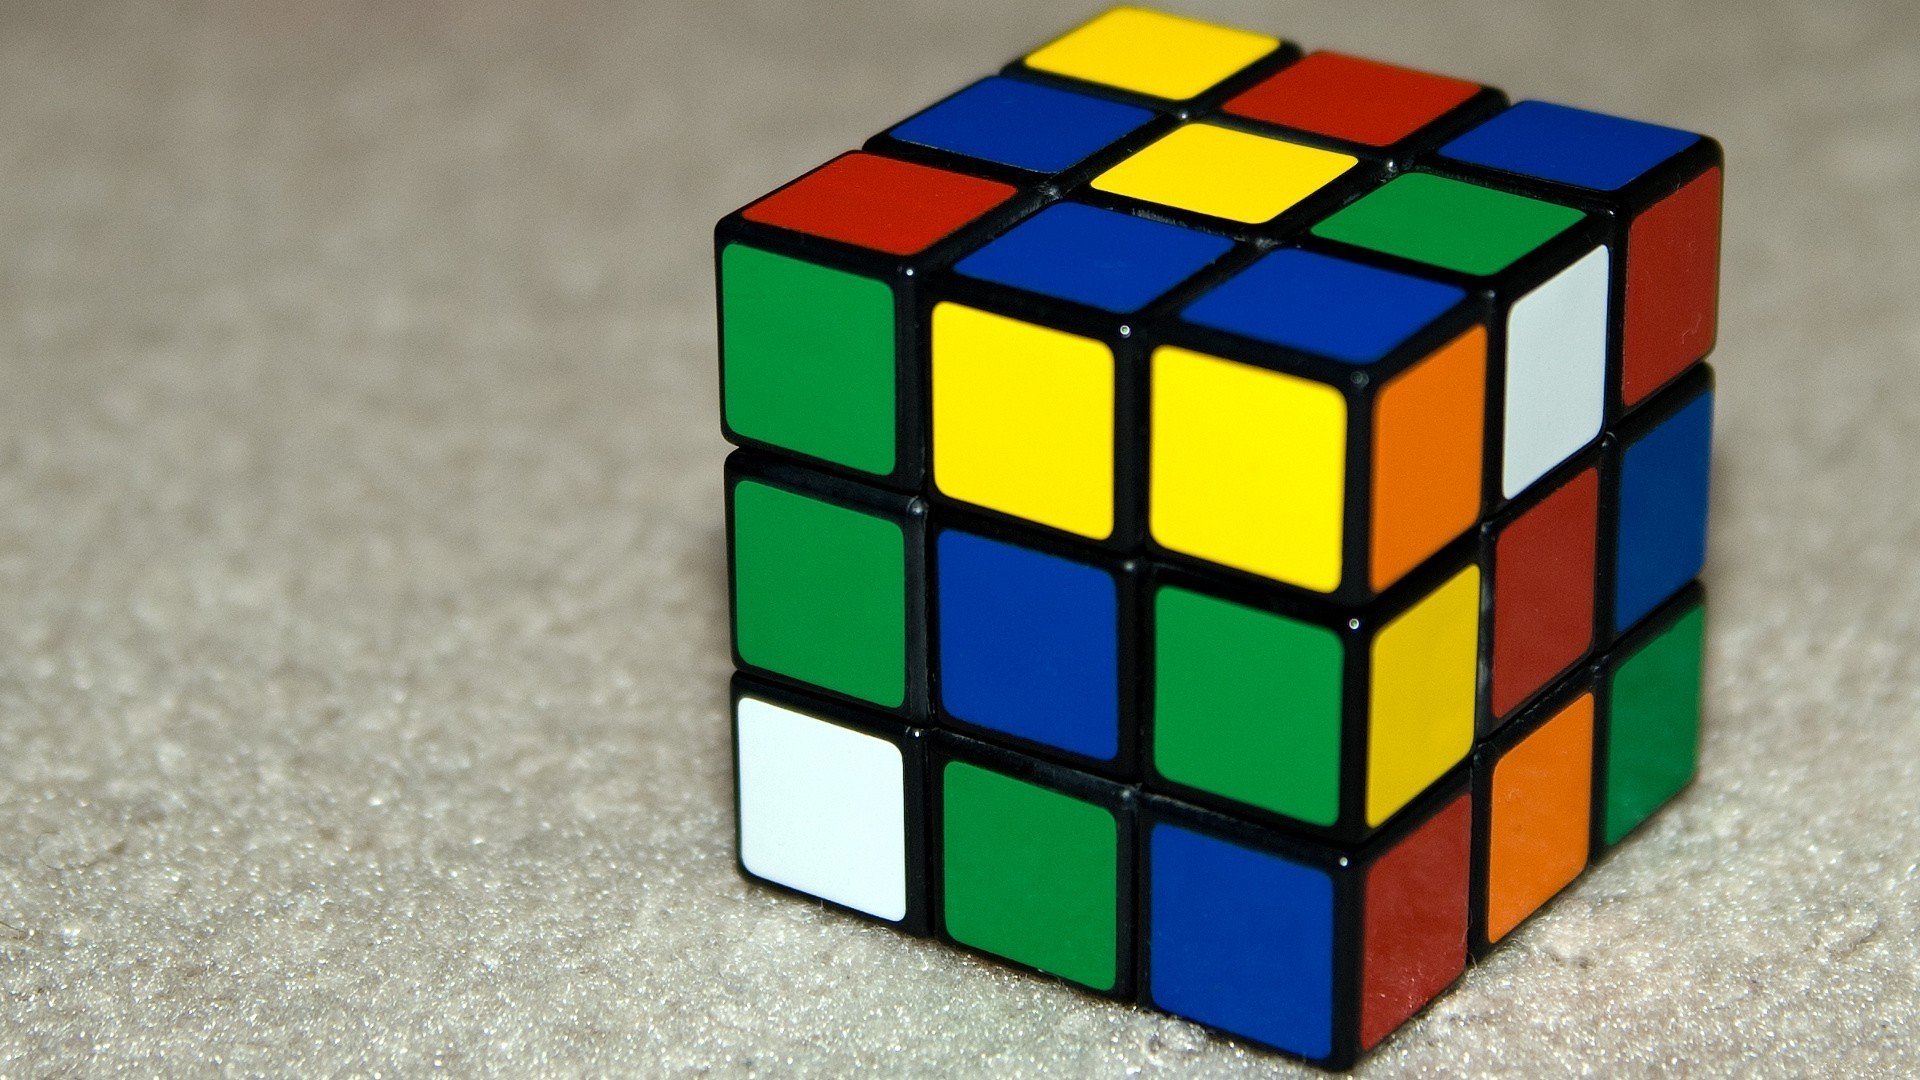 Download 1080p Rubik's Cube PC wallpaper ID:216026 for free